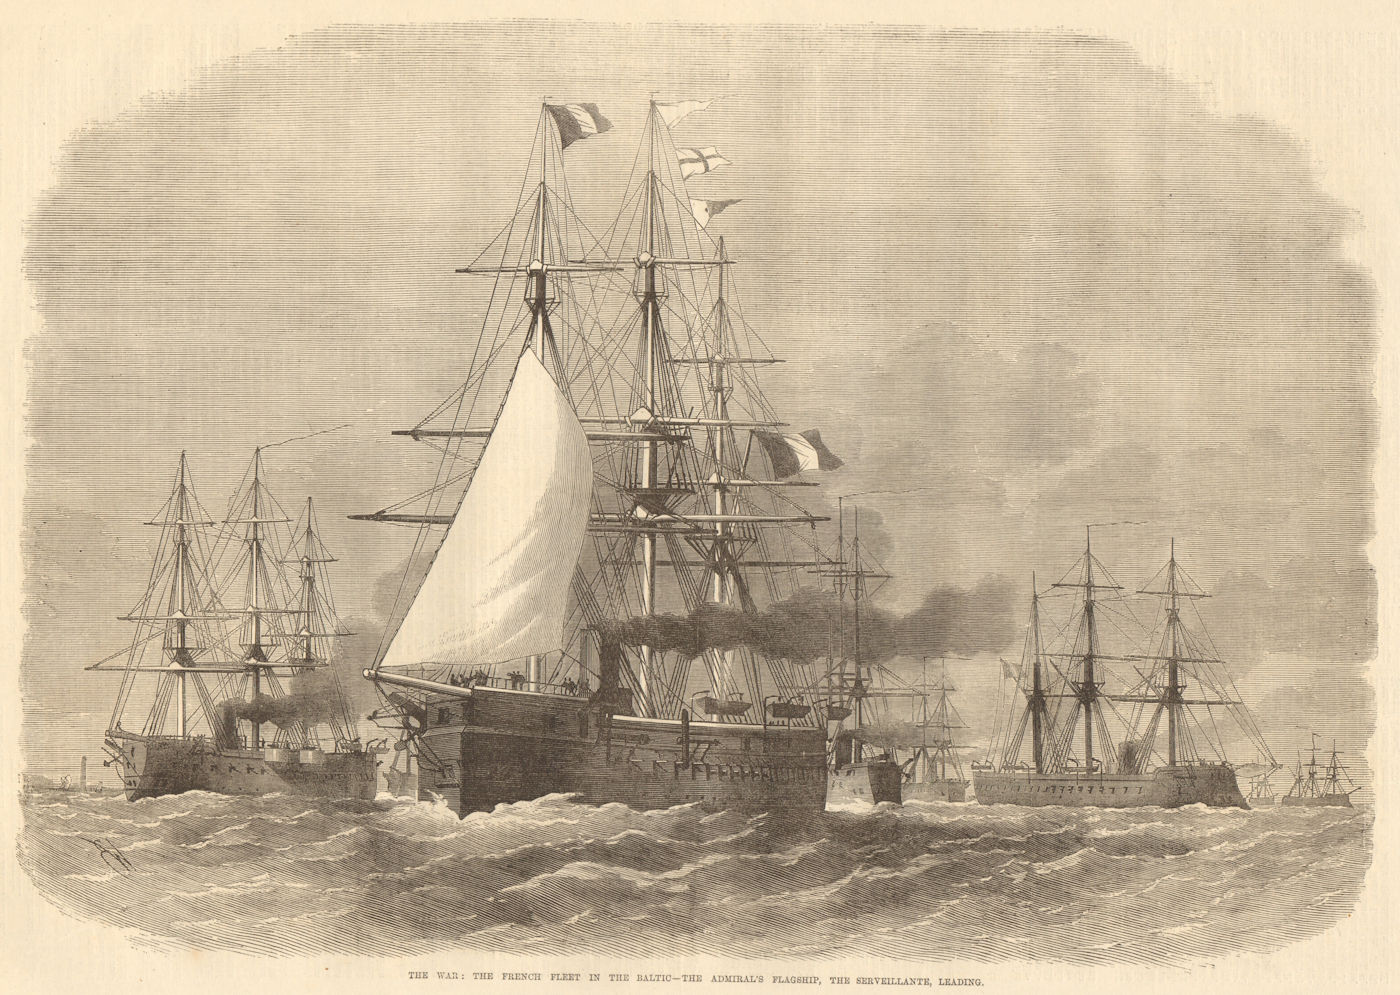 Franco-Prussian war: the French fleet in the Baltic. Serveillante flagship 1870